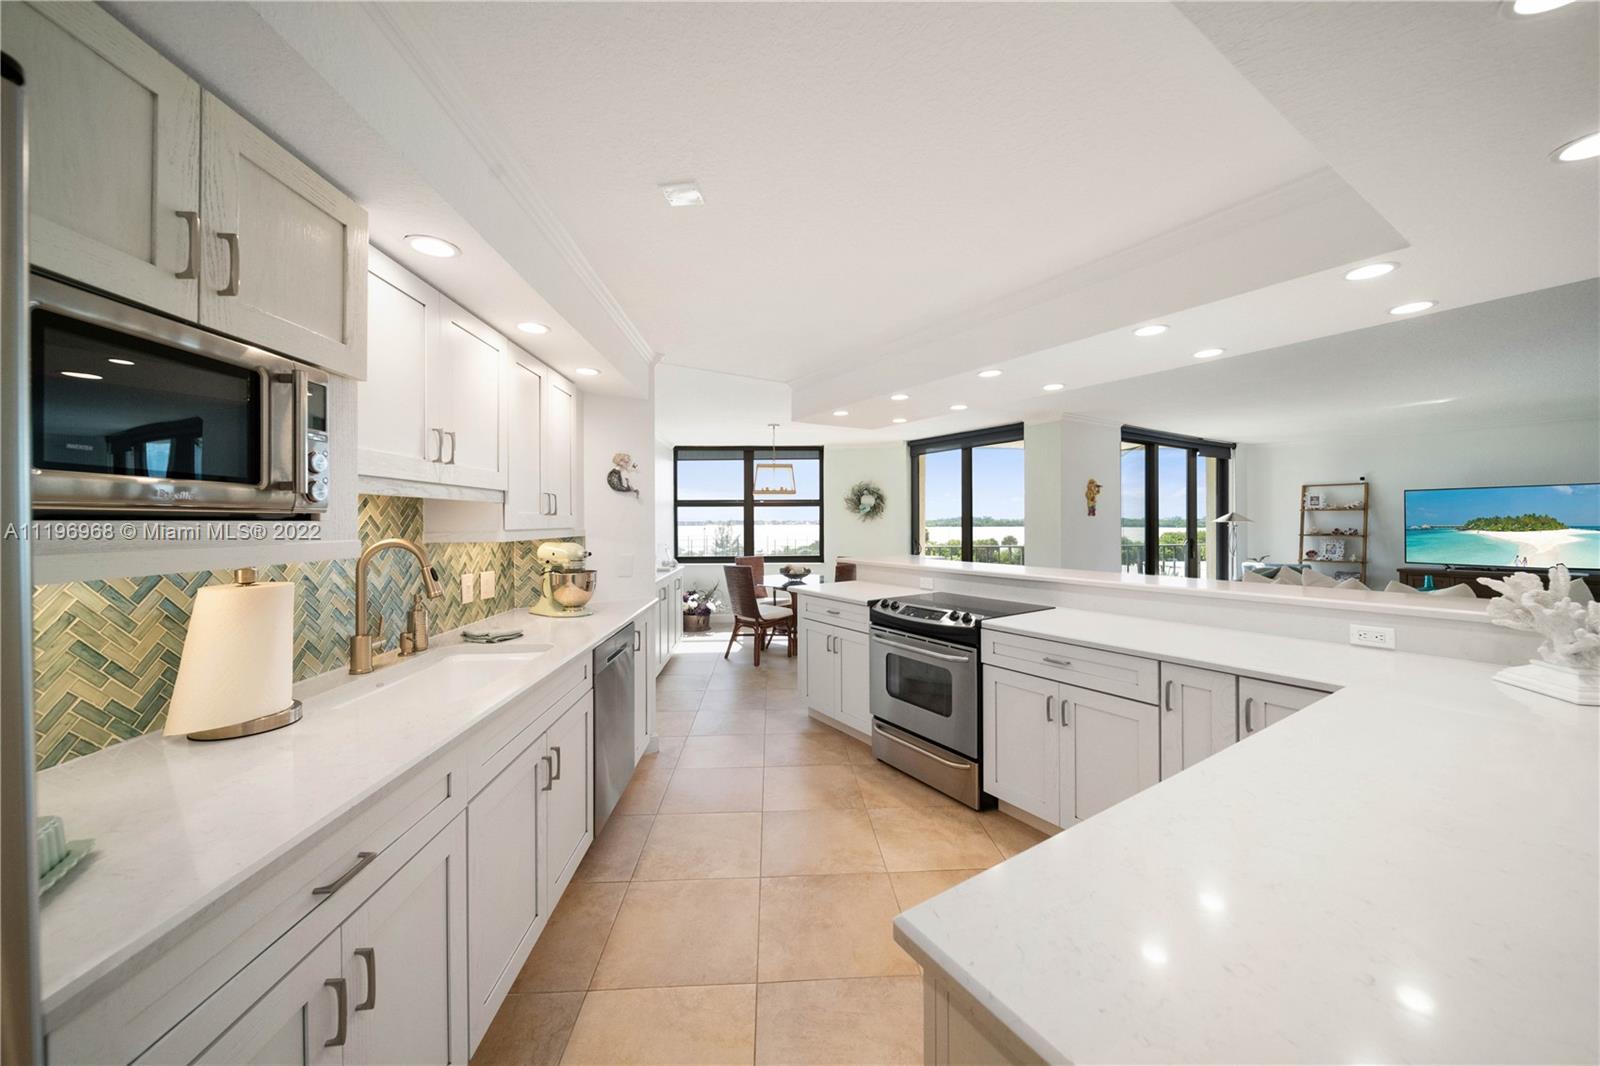 a large white kitchen with stainless steel appliances